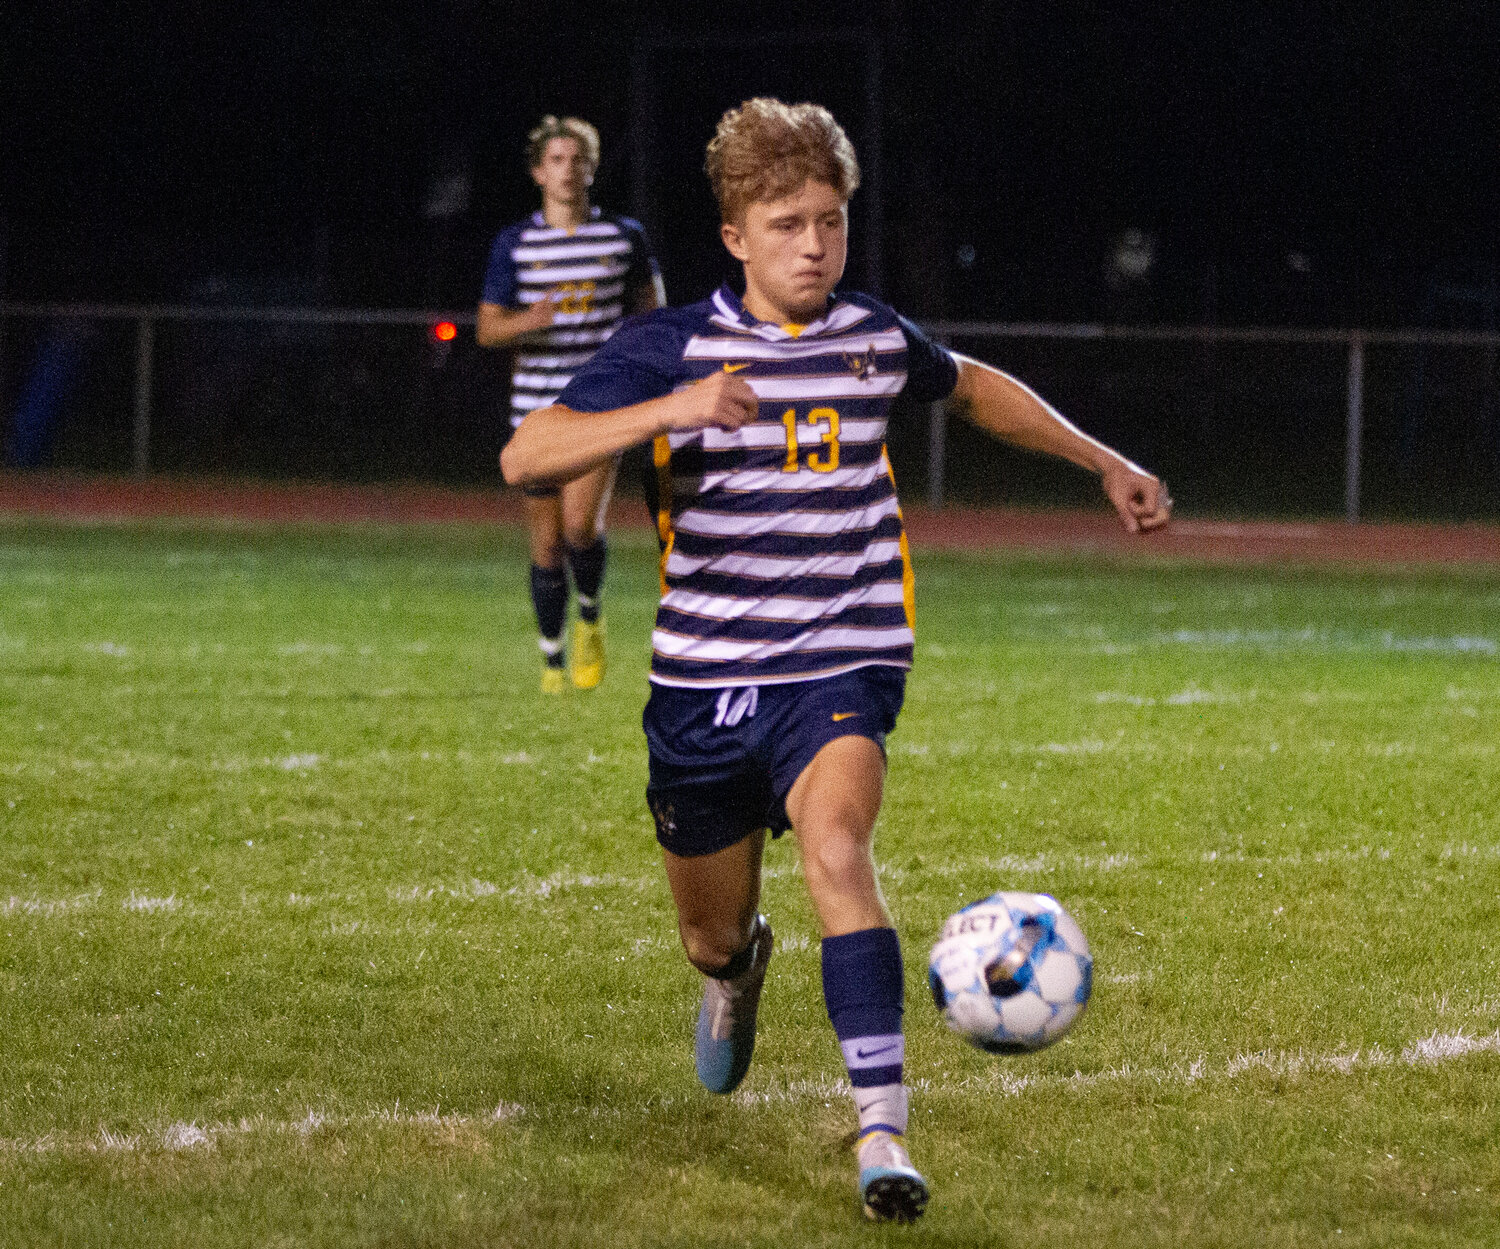 Barrington’s Colin Hope dribbles the ball up the field during the Eagles’s 3-0 win over Mt. Hope on Thursday night.